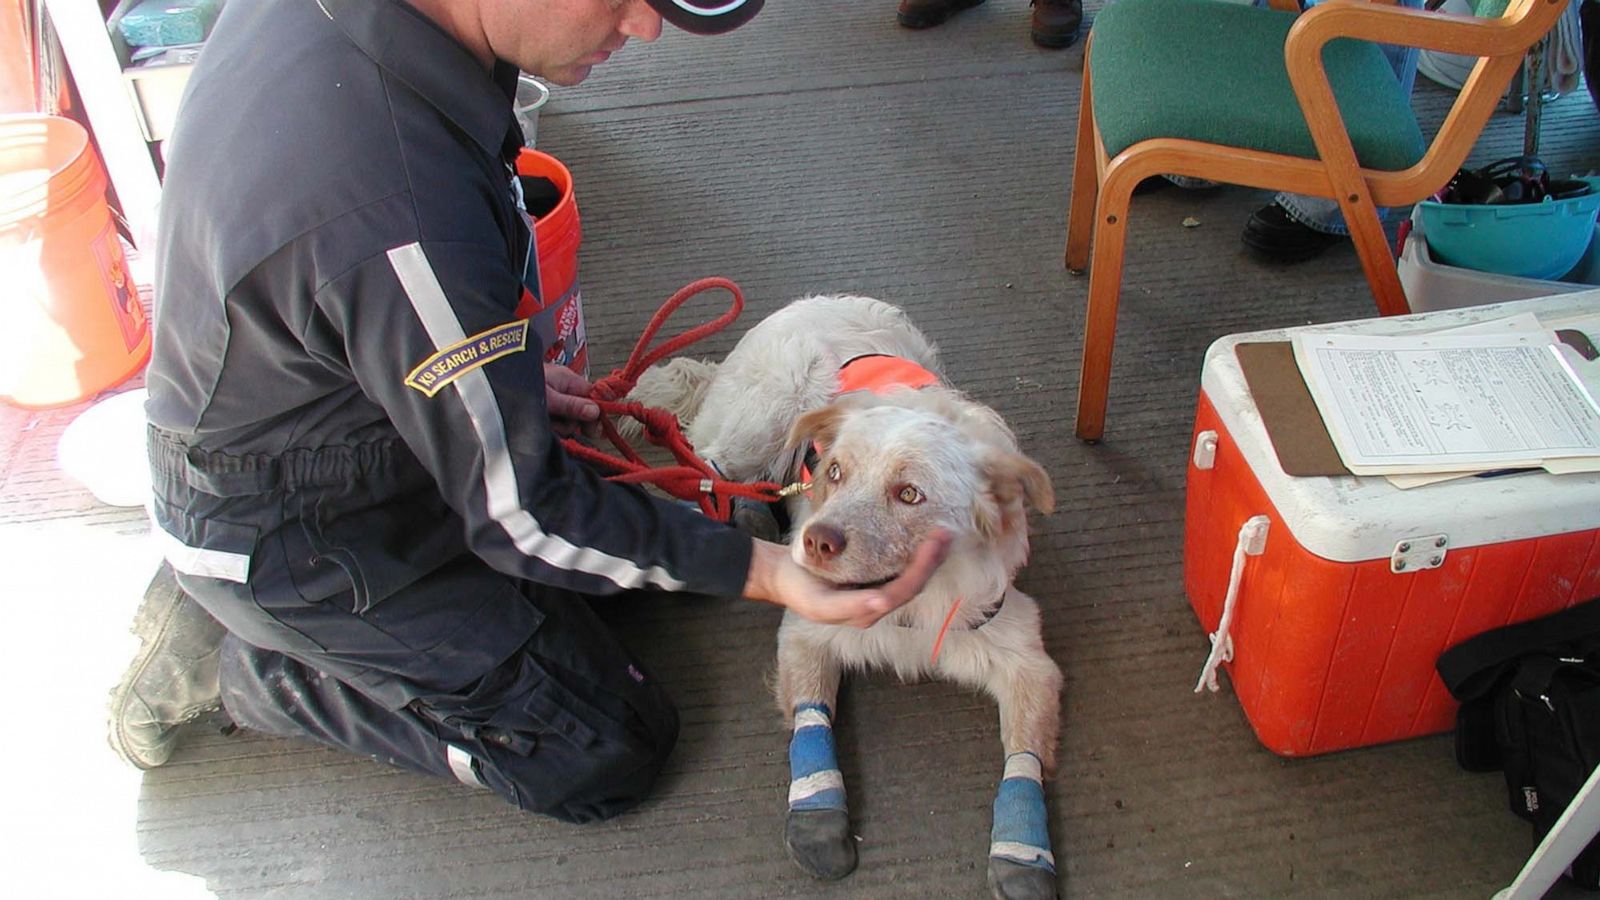 Godsend': The vets and volunteers who cared for 9/11 rescue dogs - ABC News